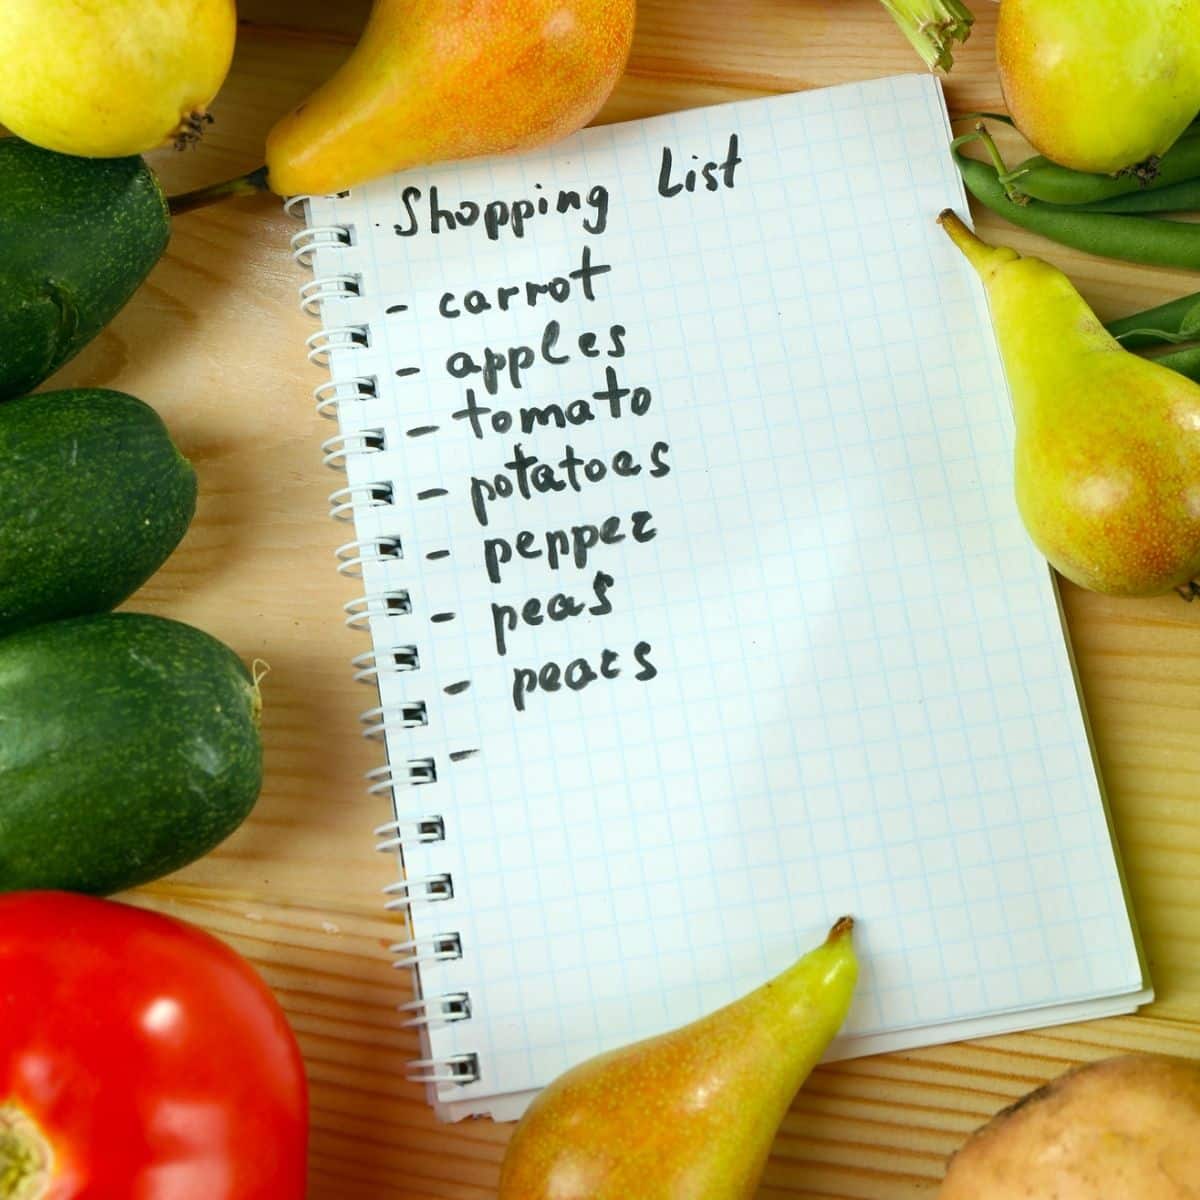  Fruits and vegetables with shopping list 